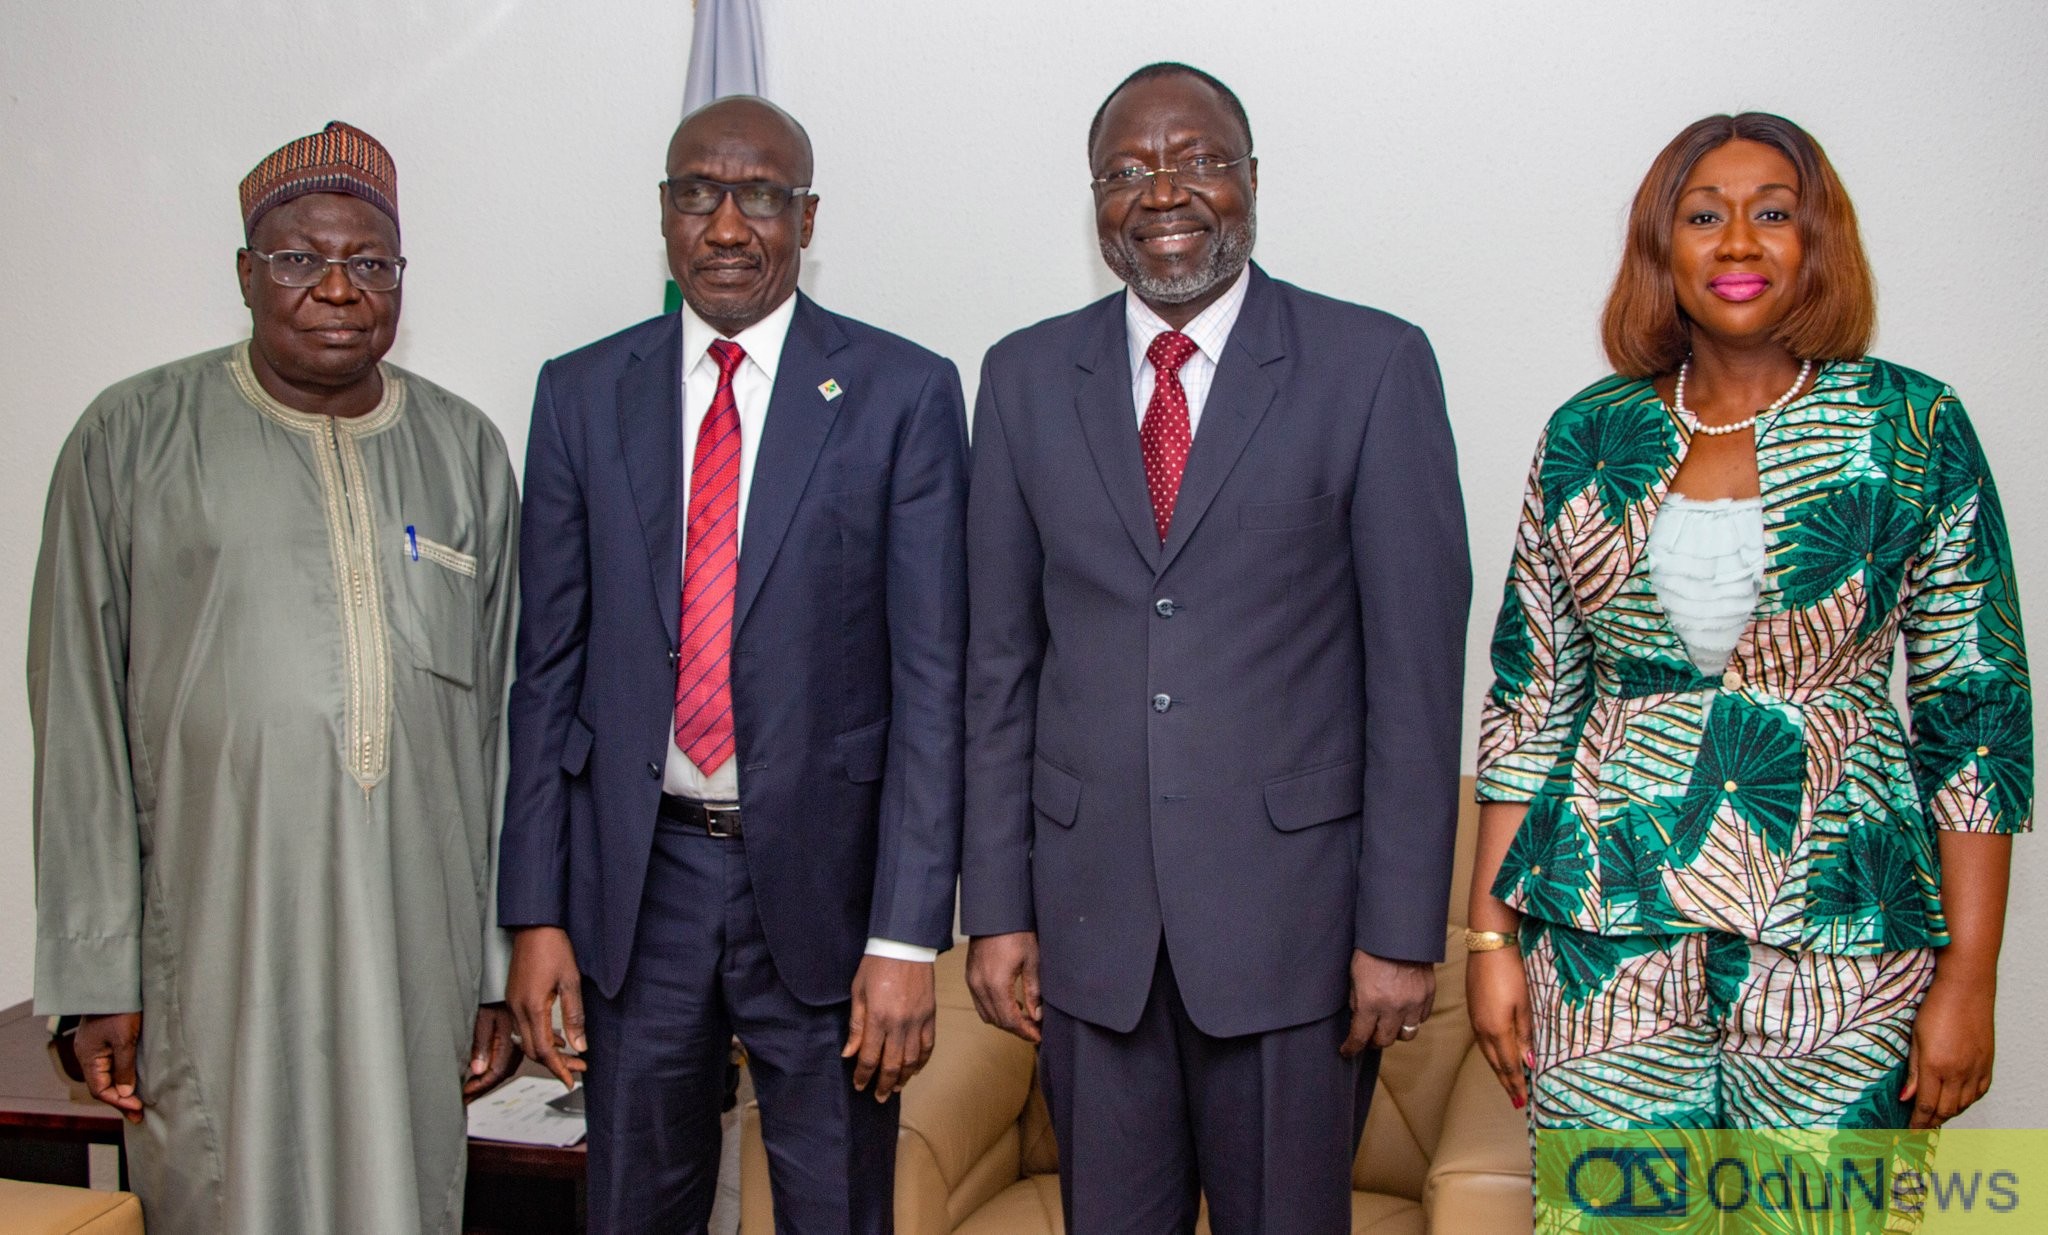 NNPC, Morocco, ECOWAS To Sign MoU On 7,000km Gas Pipeline Project  